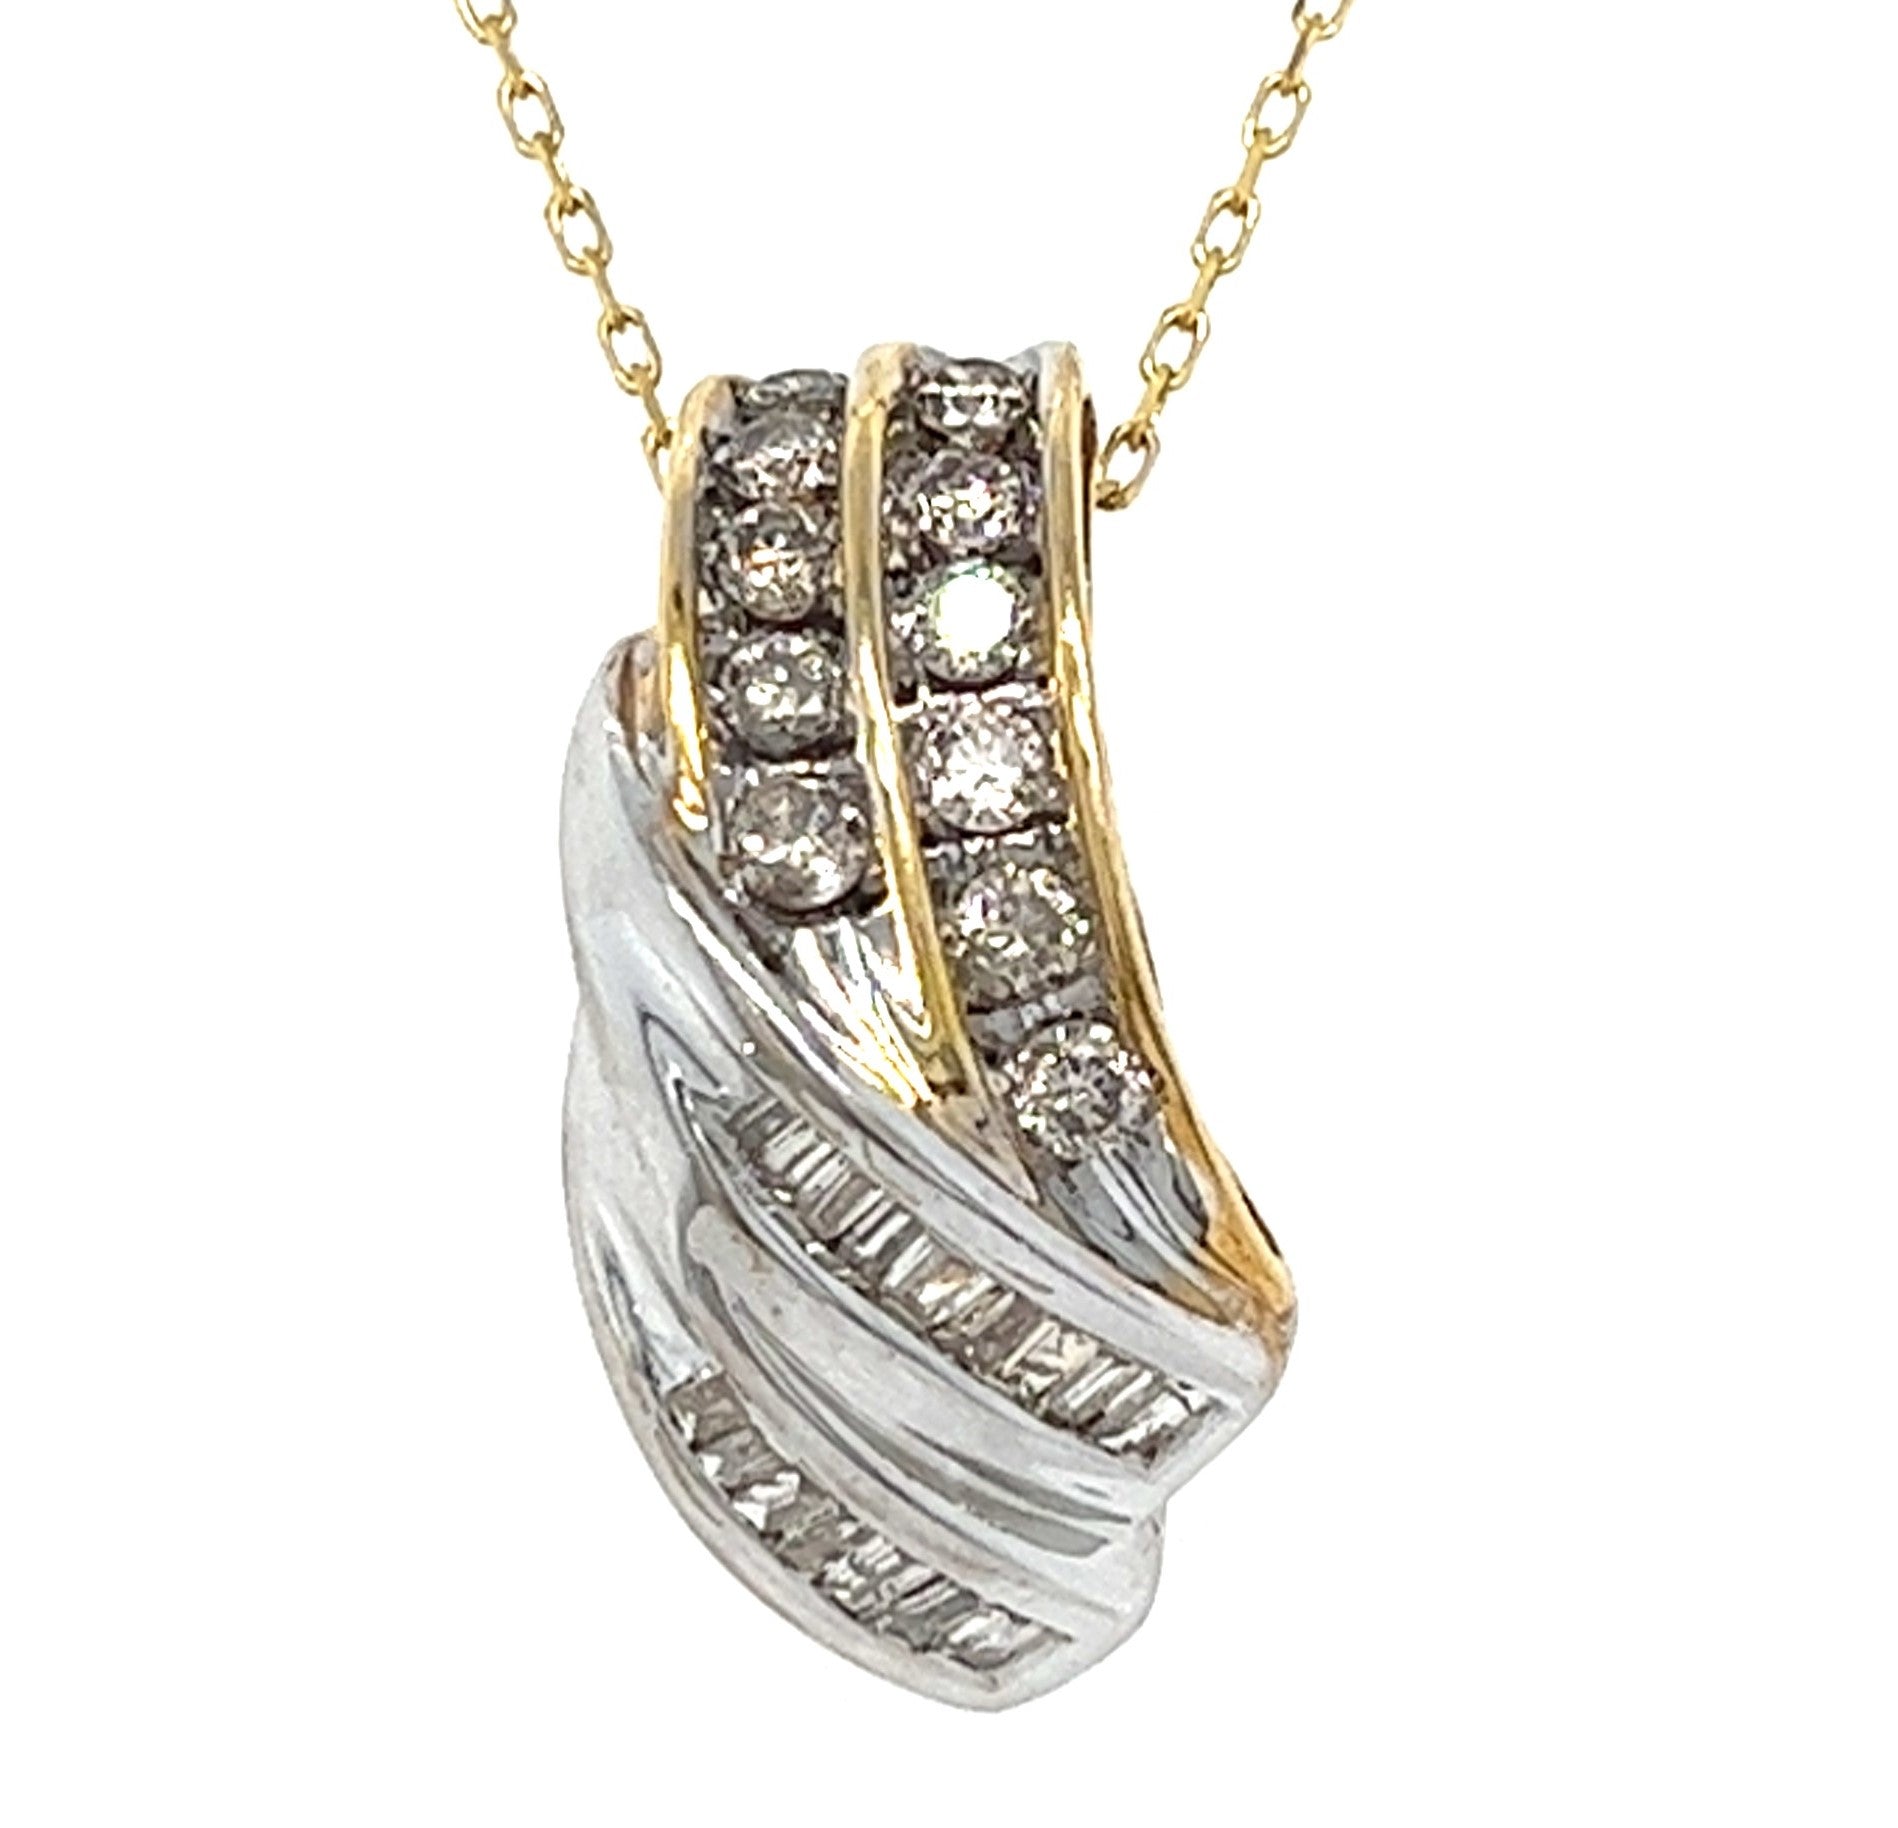 14KT TWO TONE ROUND AND BAGUETTE PENDANT